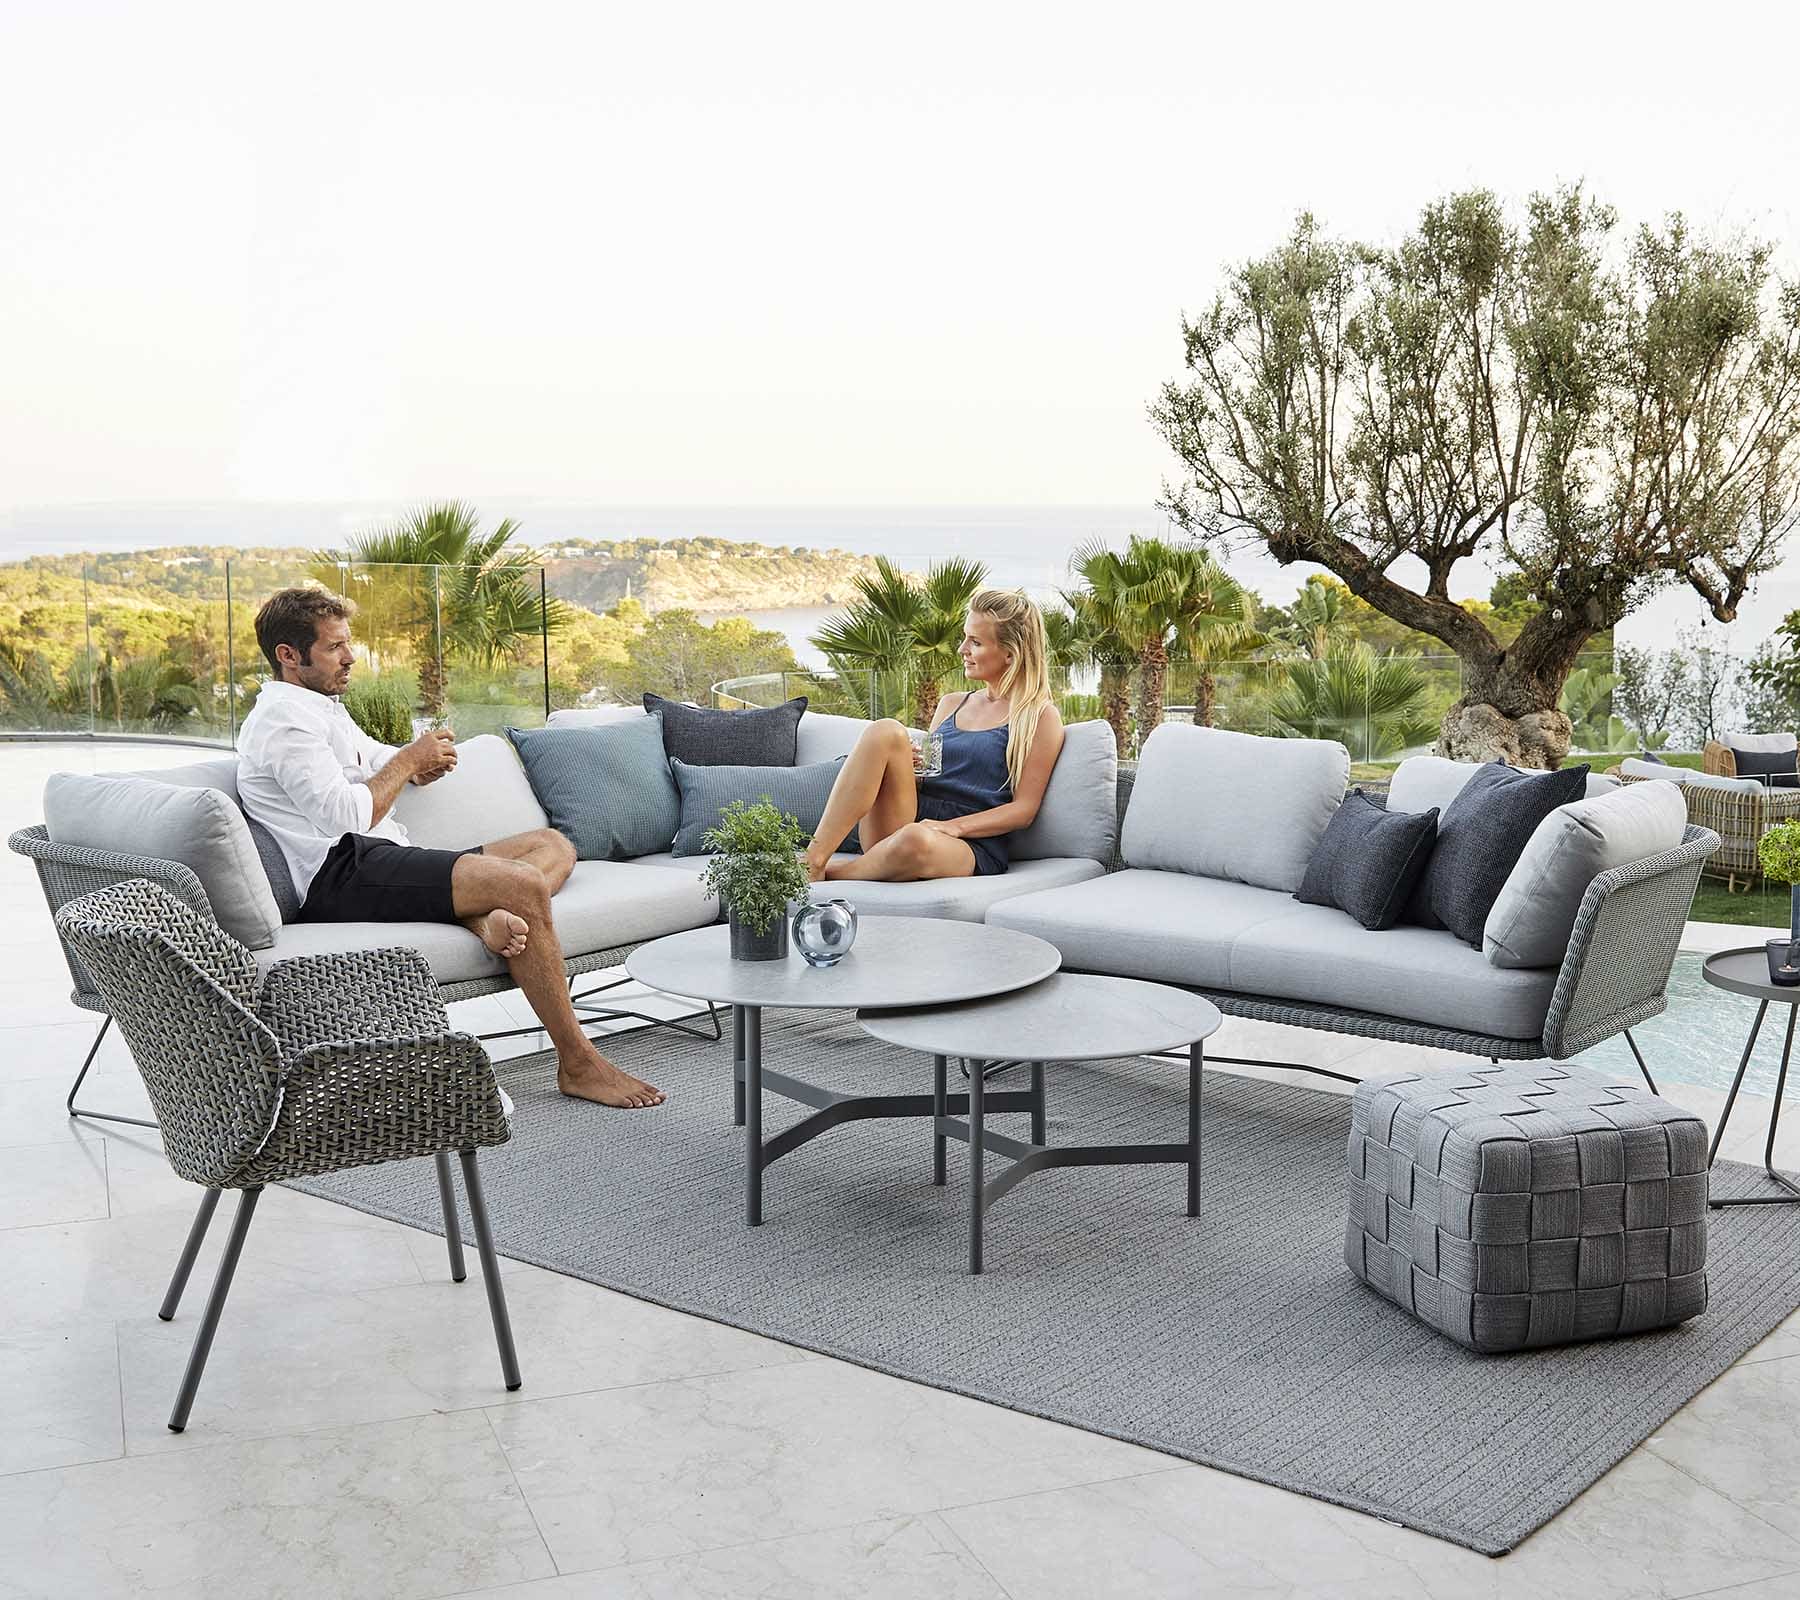 Boxhill's Horizon 2-Seater Outdoor Right Module Sofa lifestyle image together with Horizon 2-Seater Outdoor Left Module Sofa beside the pool with a man and a woman sitting down having a chat